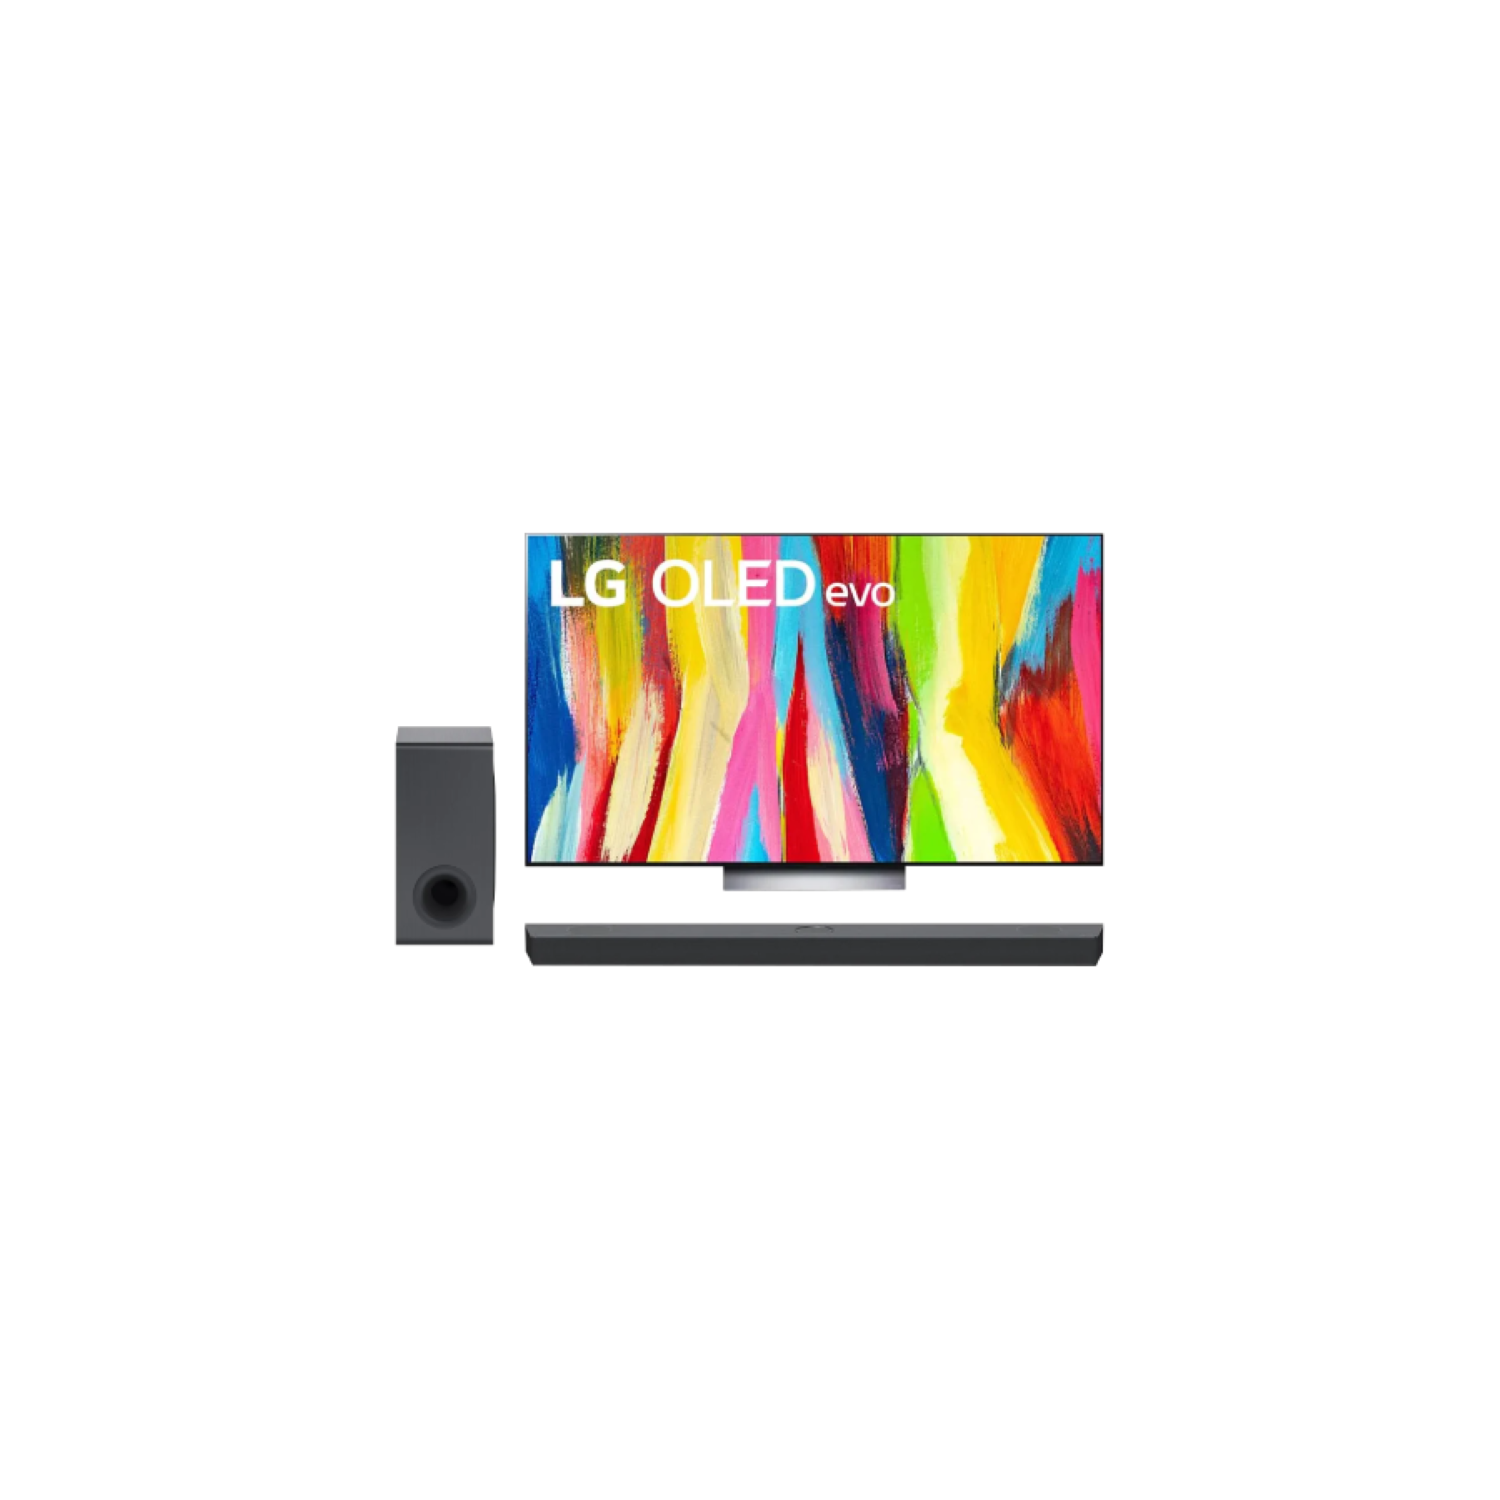 LG OLED Evo C2 Series 65” Alexa Built-in 4k Smart TV (OLED65C2PUA), 120Hz Refresh Rate + LG S90QY 5.1.3ch Sound bar with Center Up-Firing, Dolby Atmos DTS:X